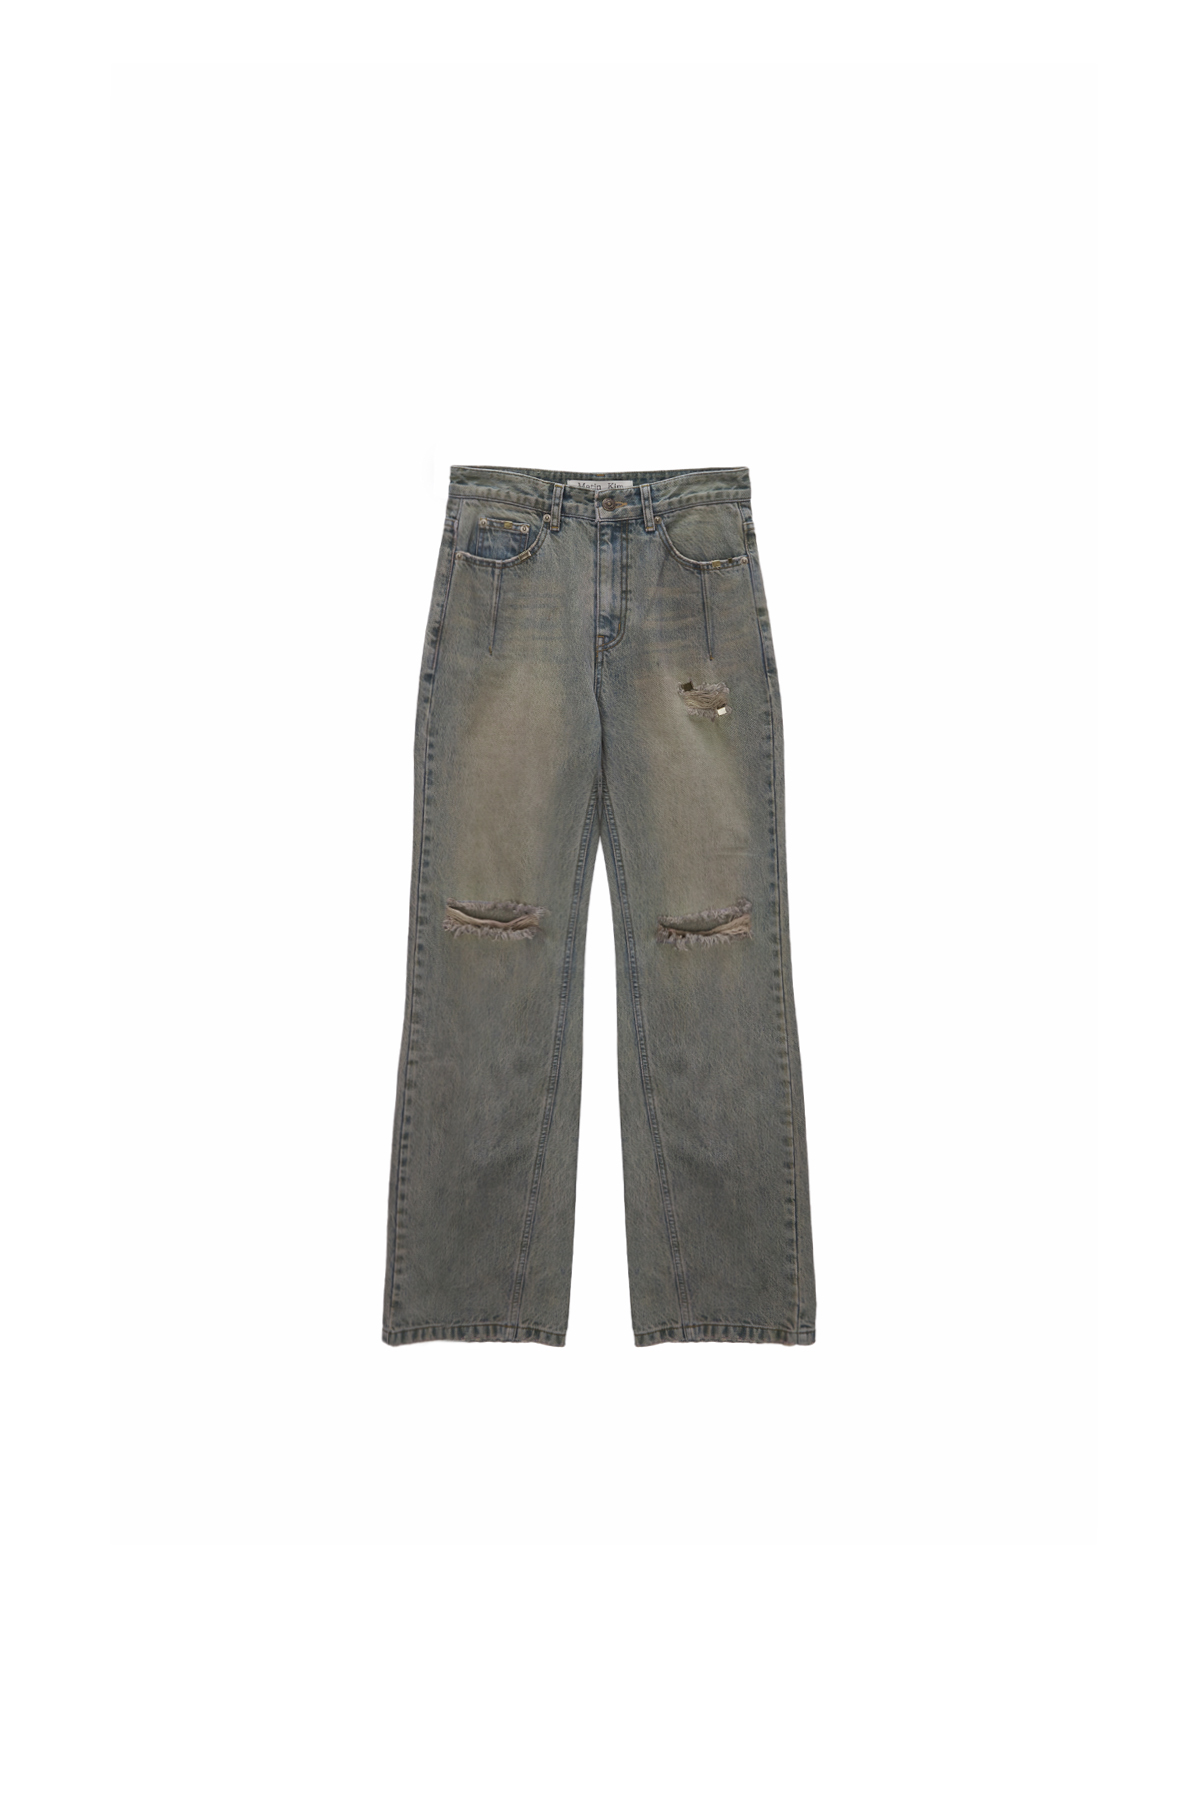 STUD POINT WASHED DENIM PANTS IN BLUE